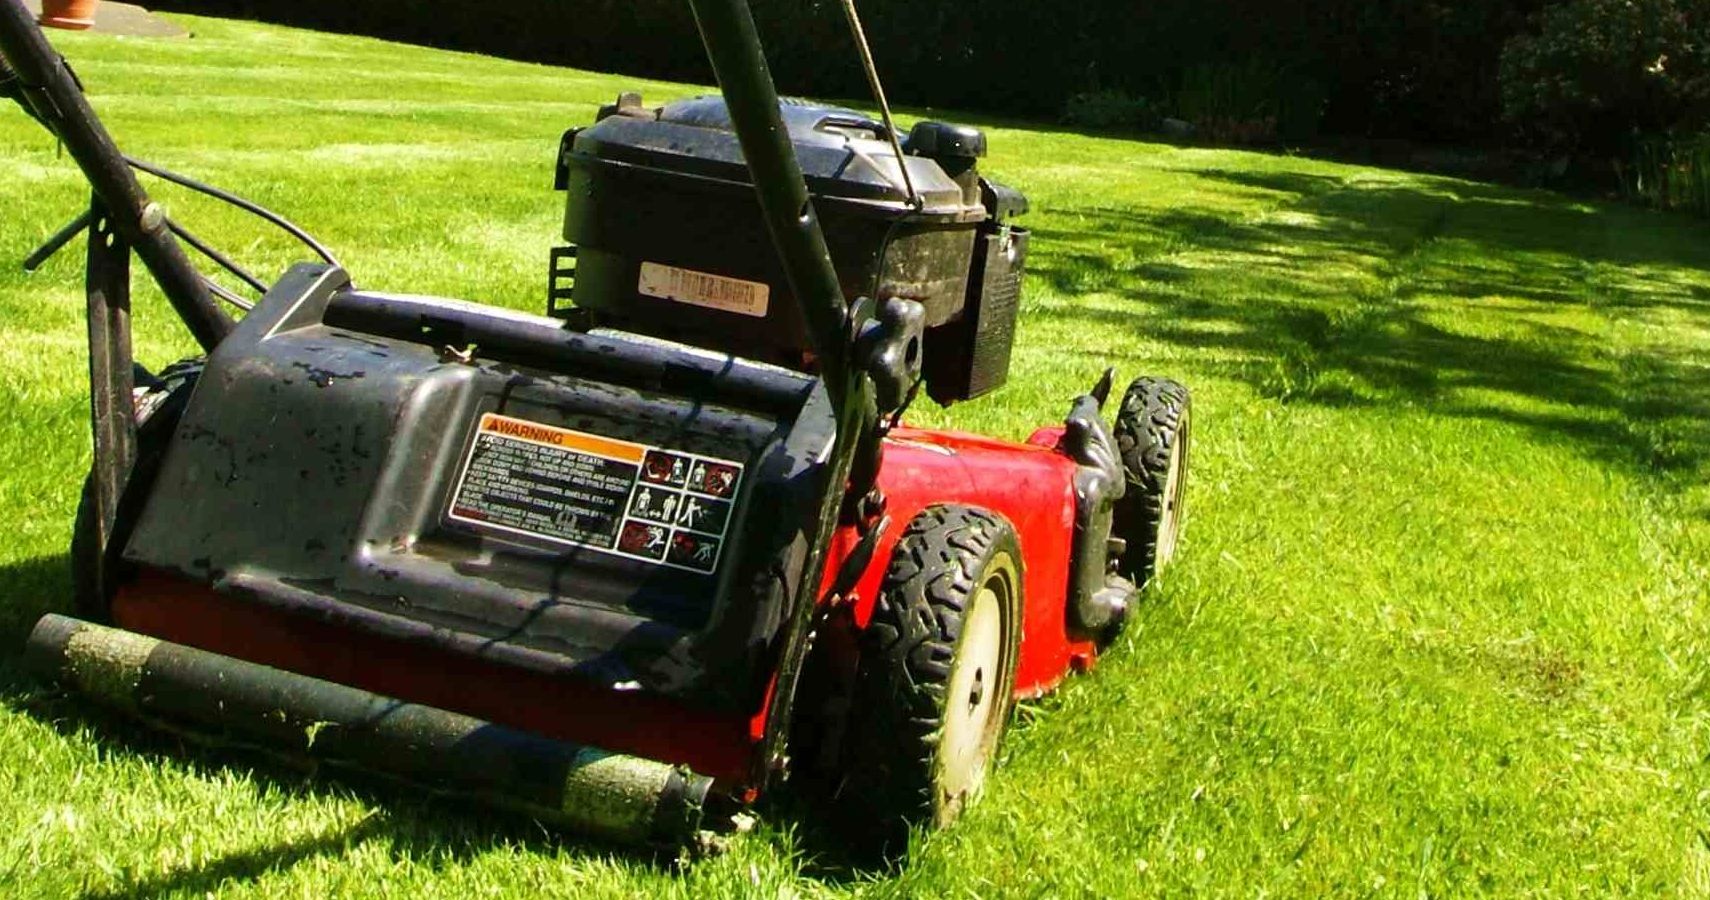 https://static1.hotcarsimages.com/wordpress/wp-content/uploads/2019/09/00-10-Things-To-look-for-when-buying-a-lawnmower.jpg